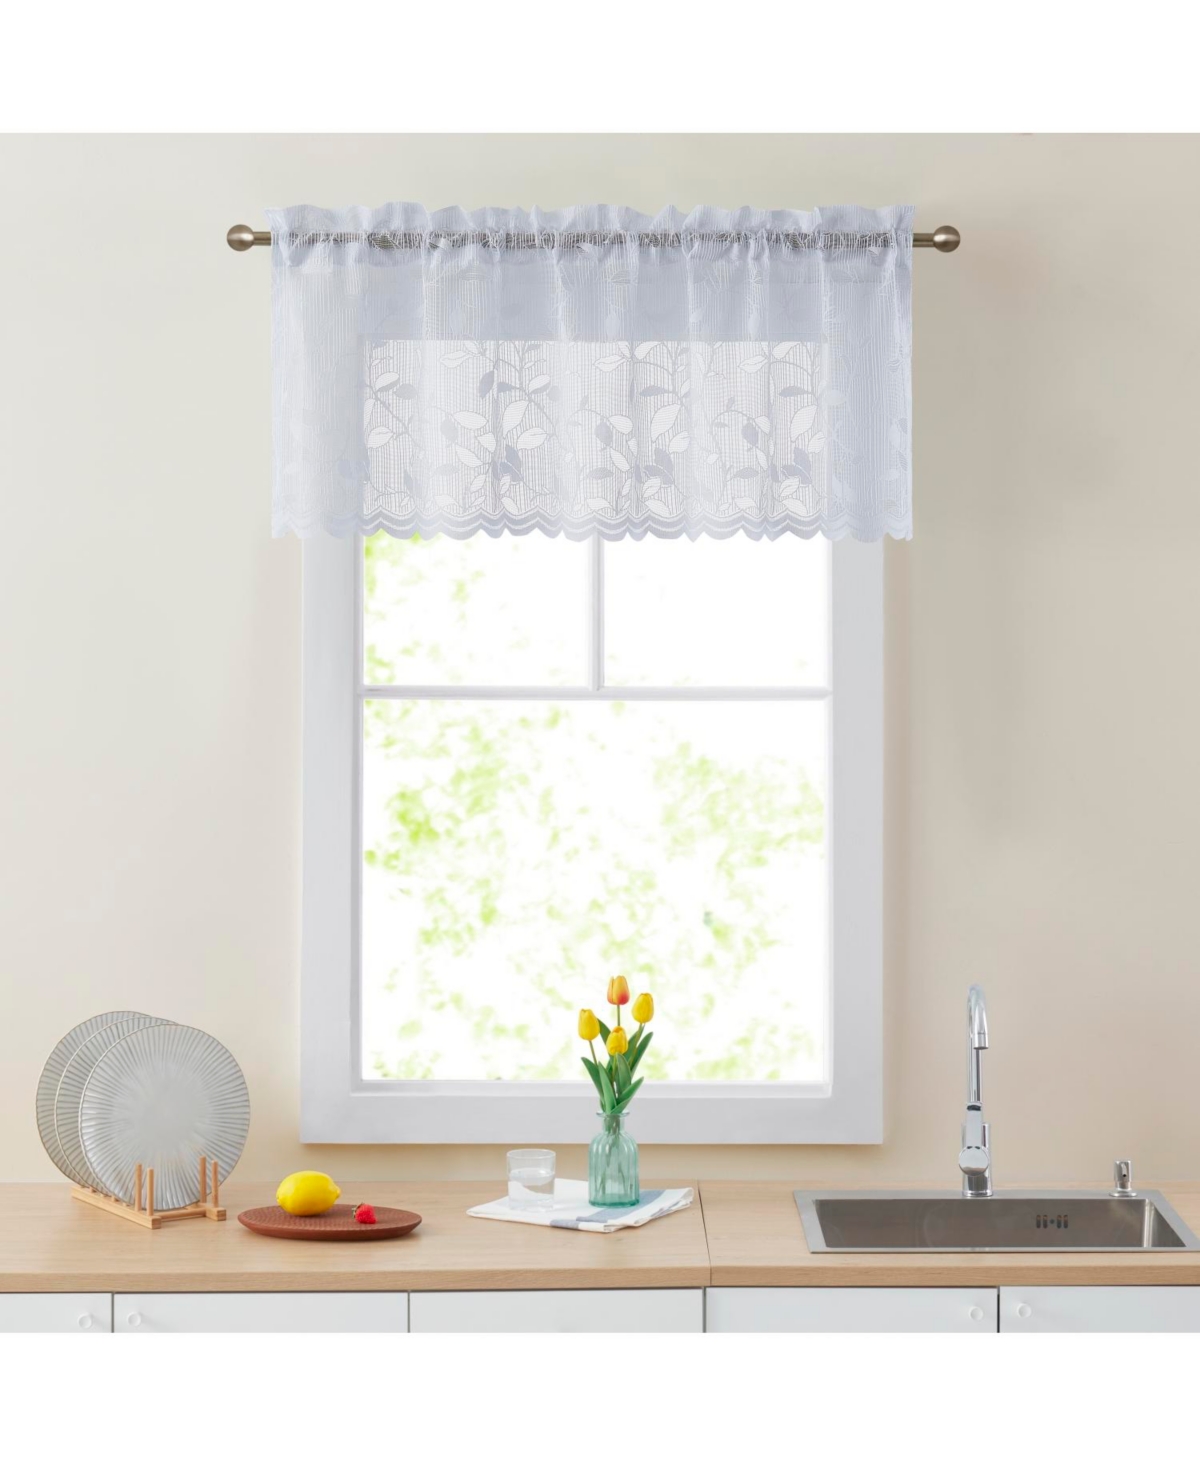 Joyce Lace Sheer Kitchen Curtain Valance Topper - Rod Pocket for Small Windows, Bathroom & Kitchen - 54 W x 18 L - White